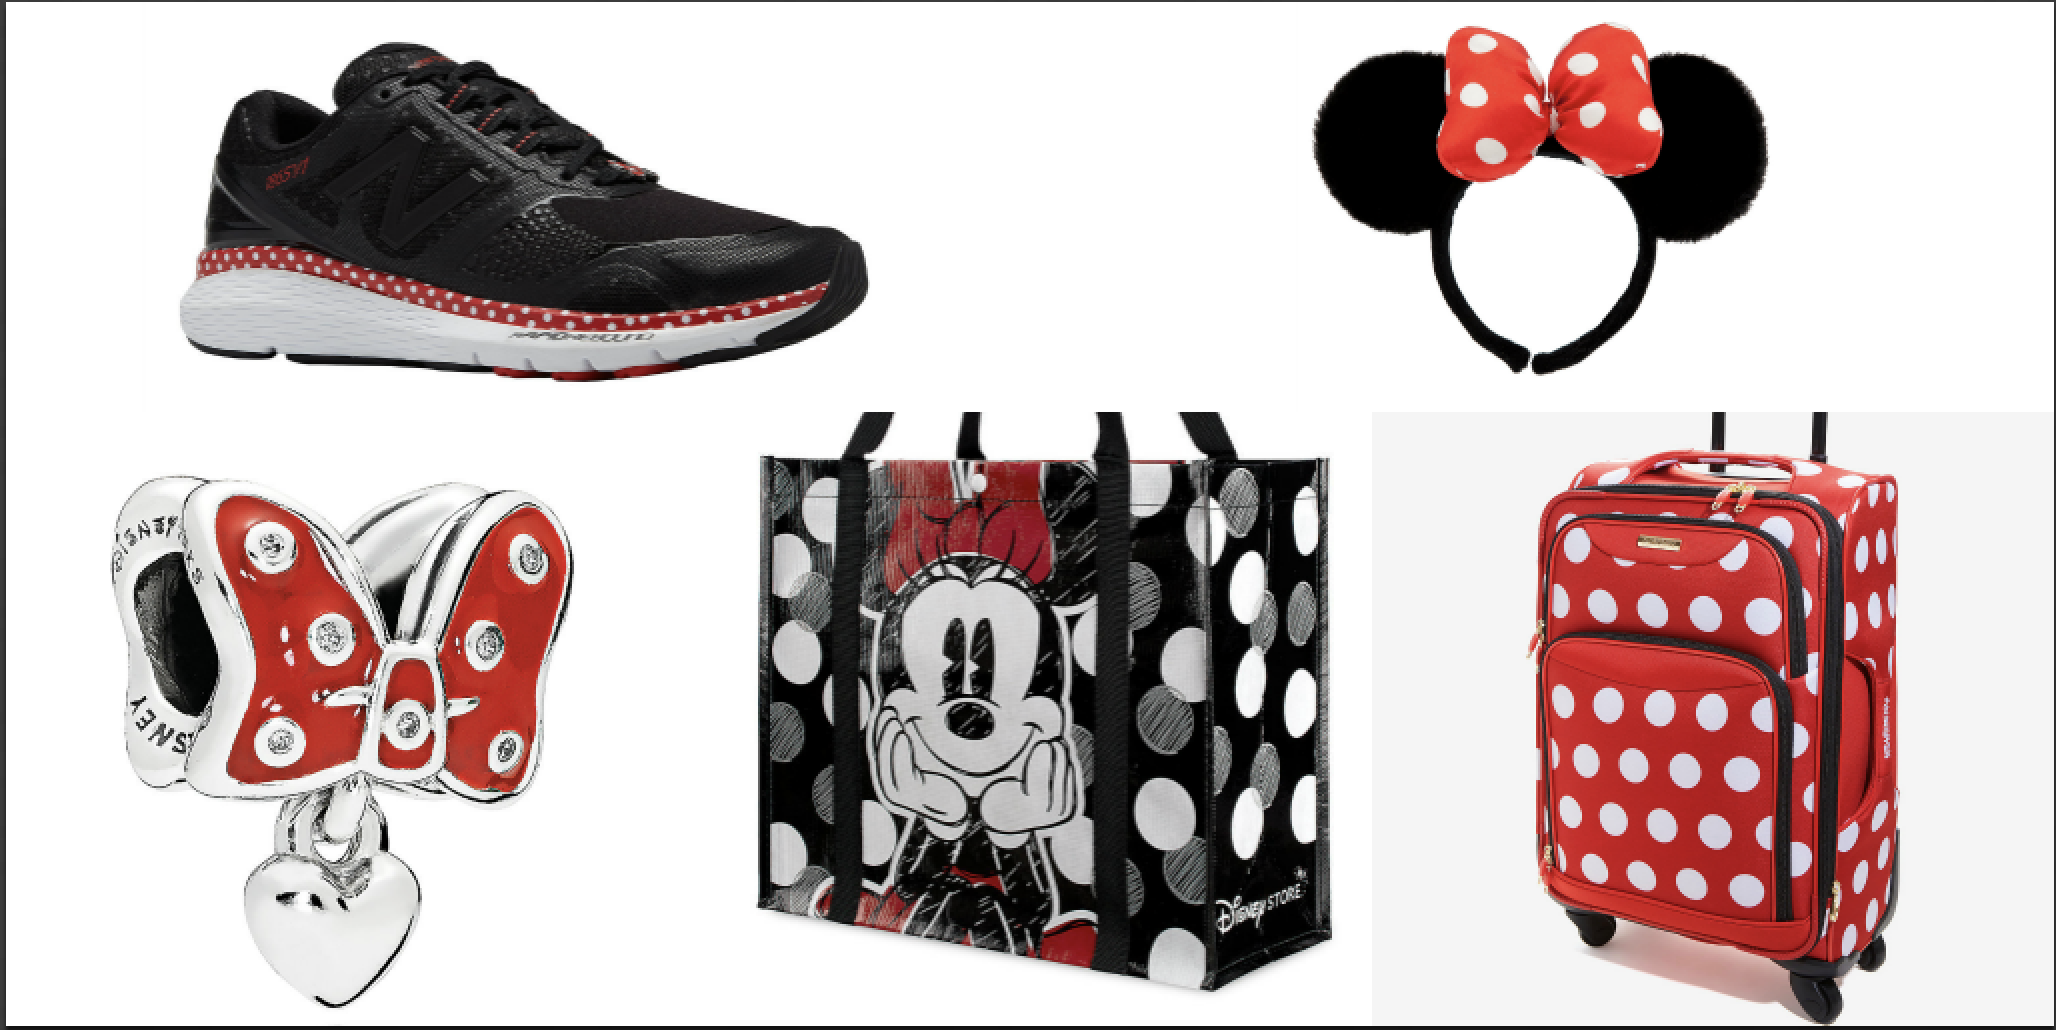 Celebrate Minnie's Big Day and "Rock the Dots" with These Awesome Items